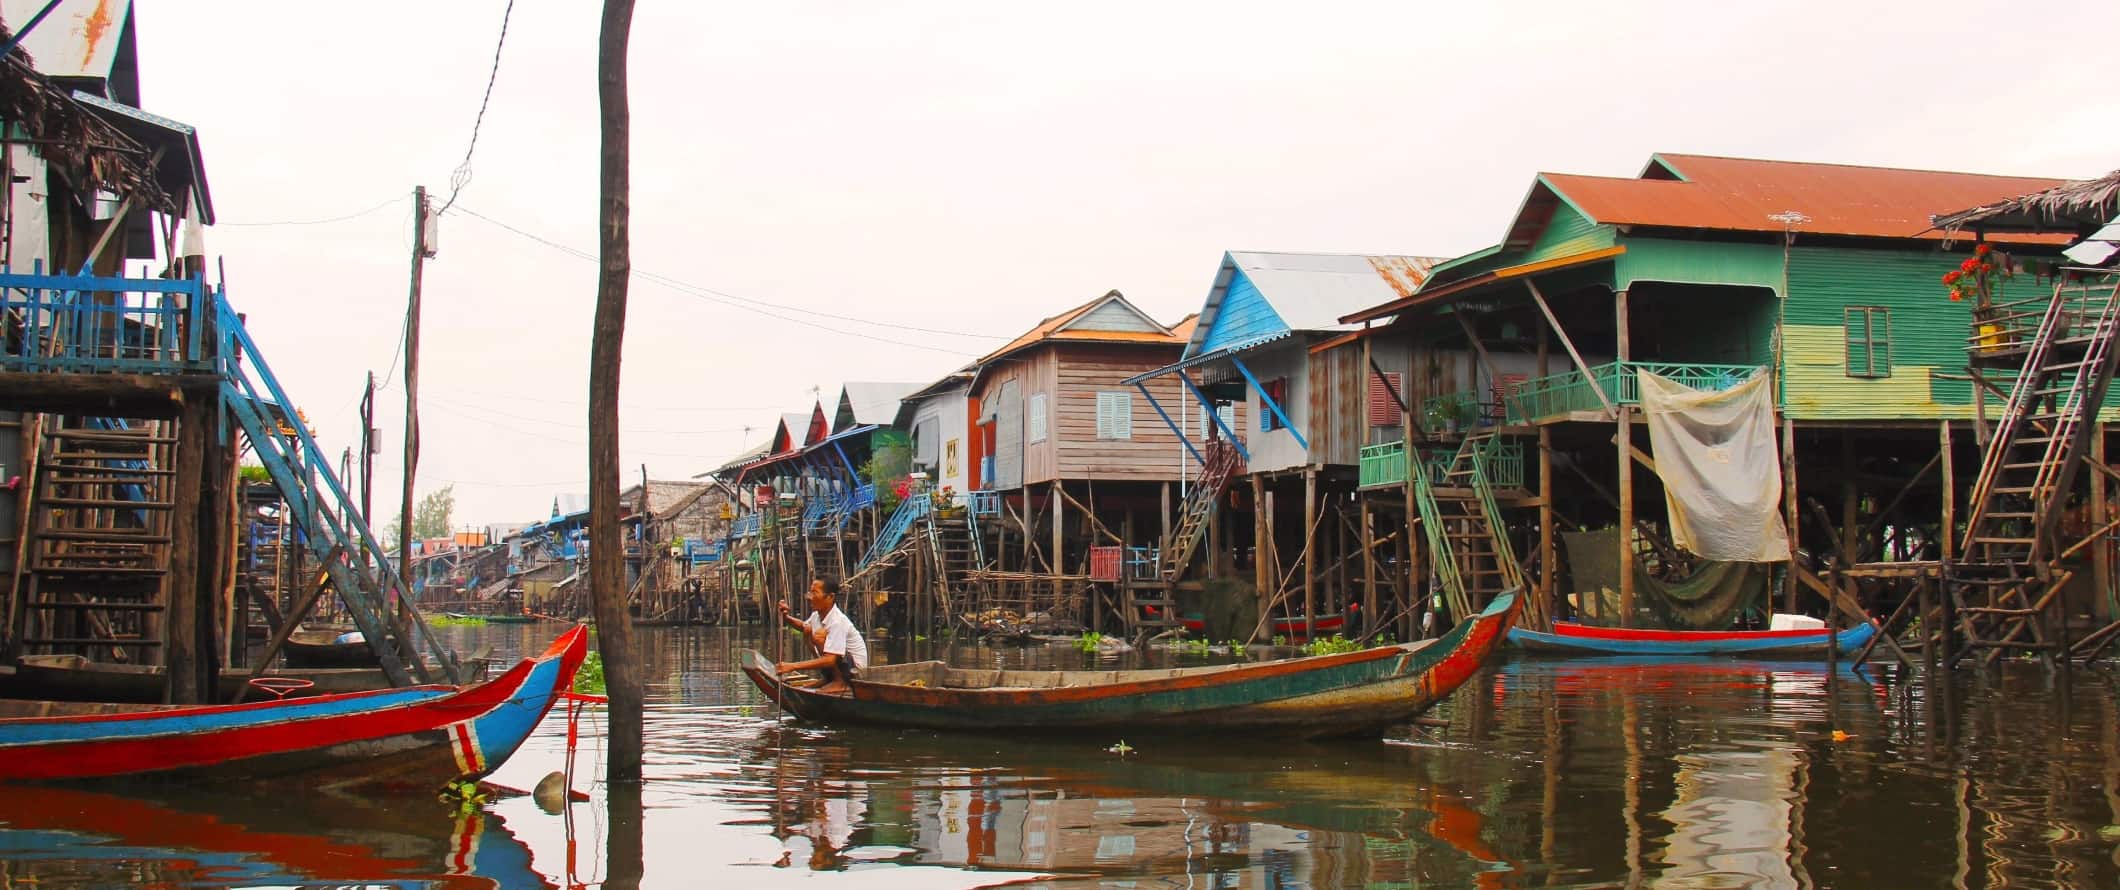 A man using a pole to maneuver a long boat down a waterway surrounded by colorful houses on stilts in Tonle Sap, Cambodia